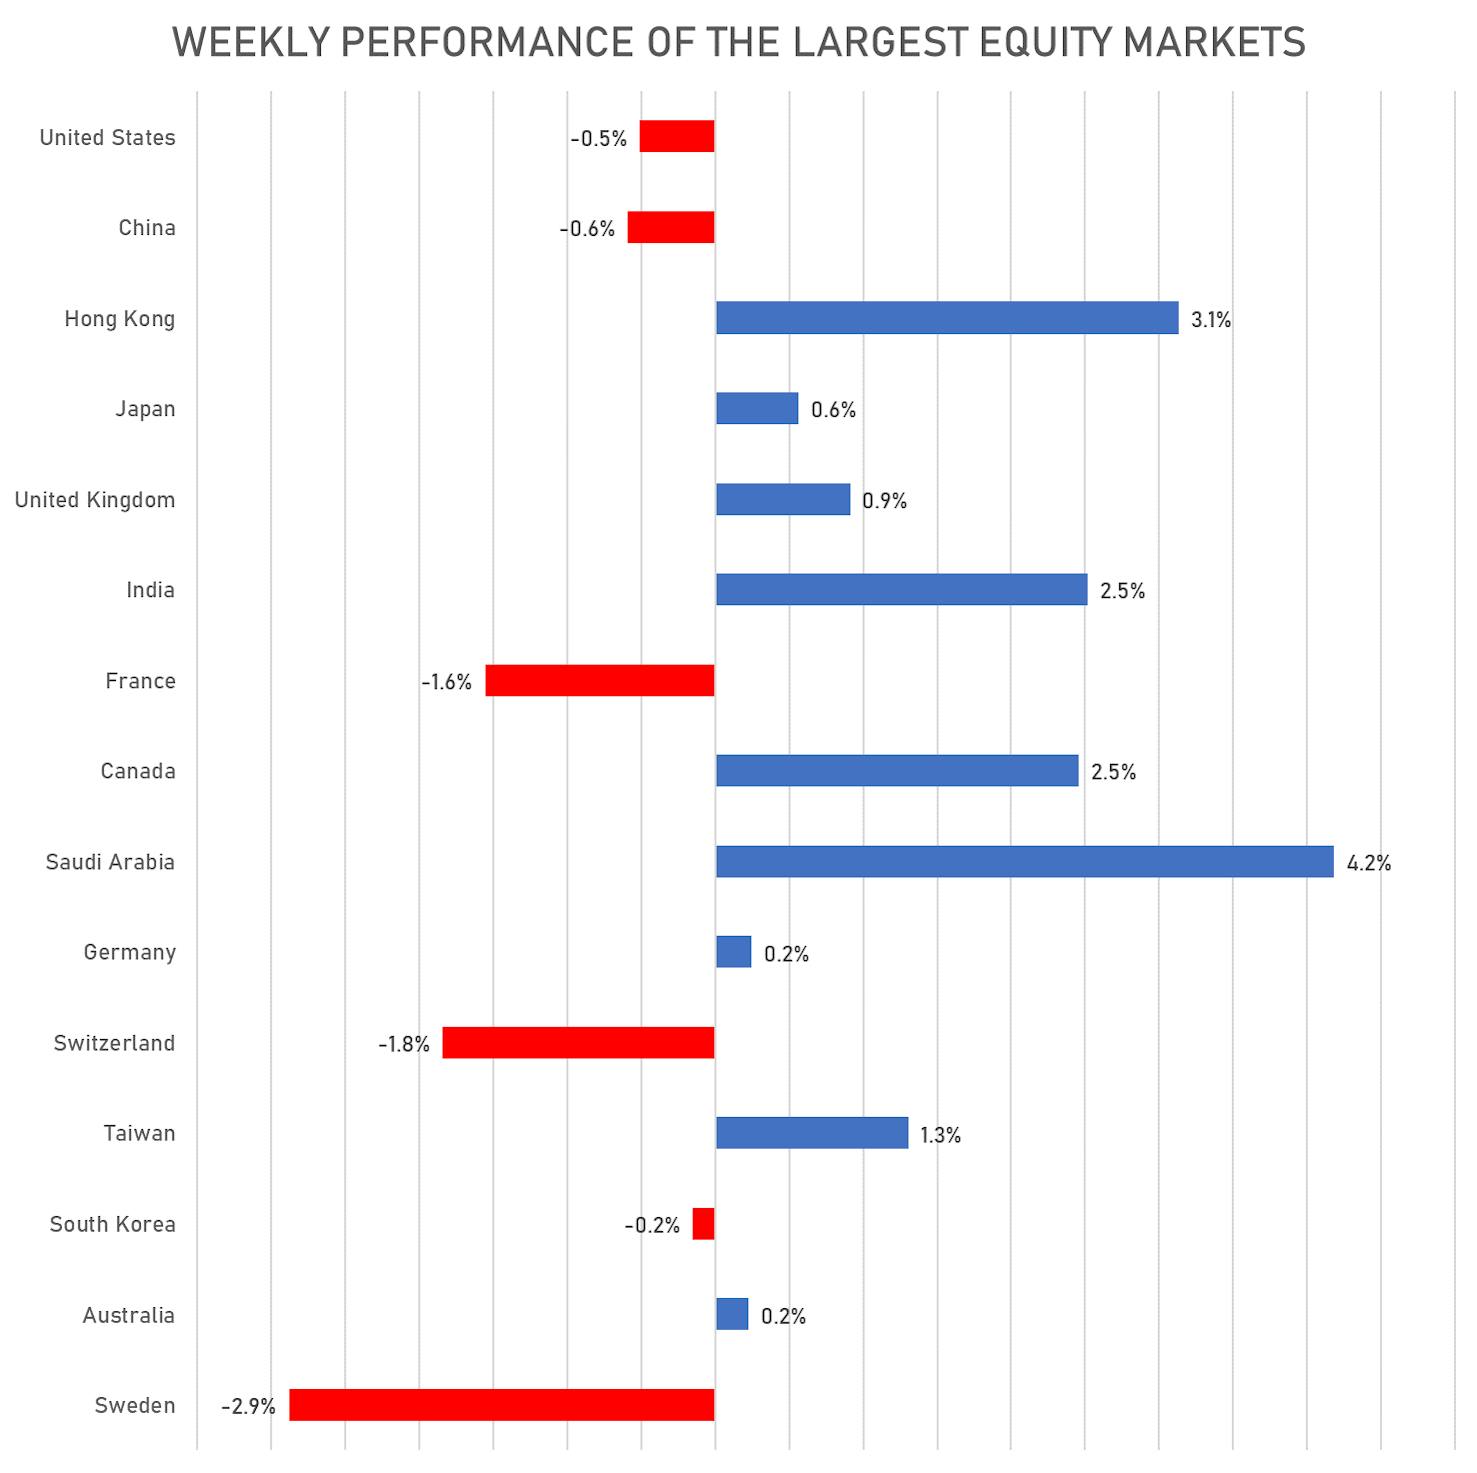 Weekly Performance Of Largest Equity Markets | Sources: phipost.com, FactSet data